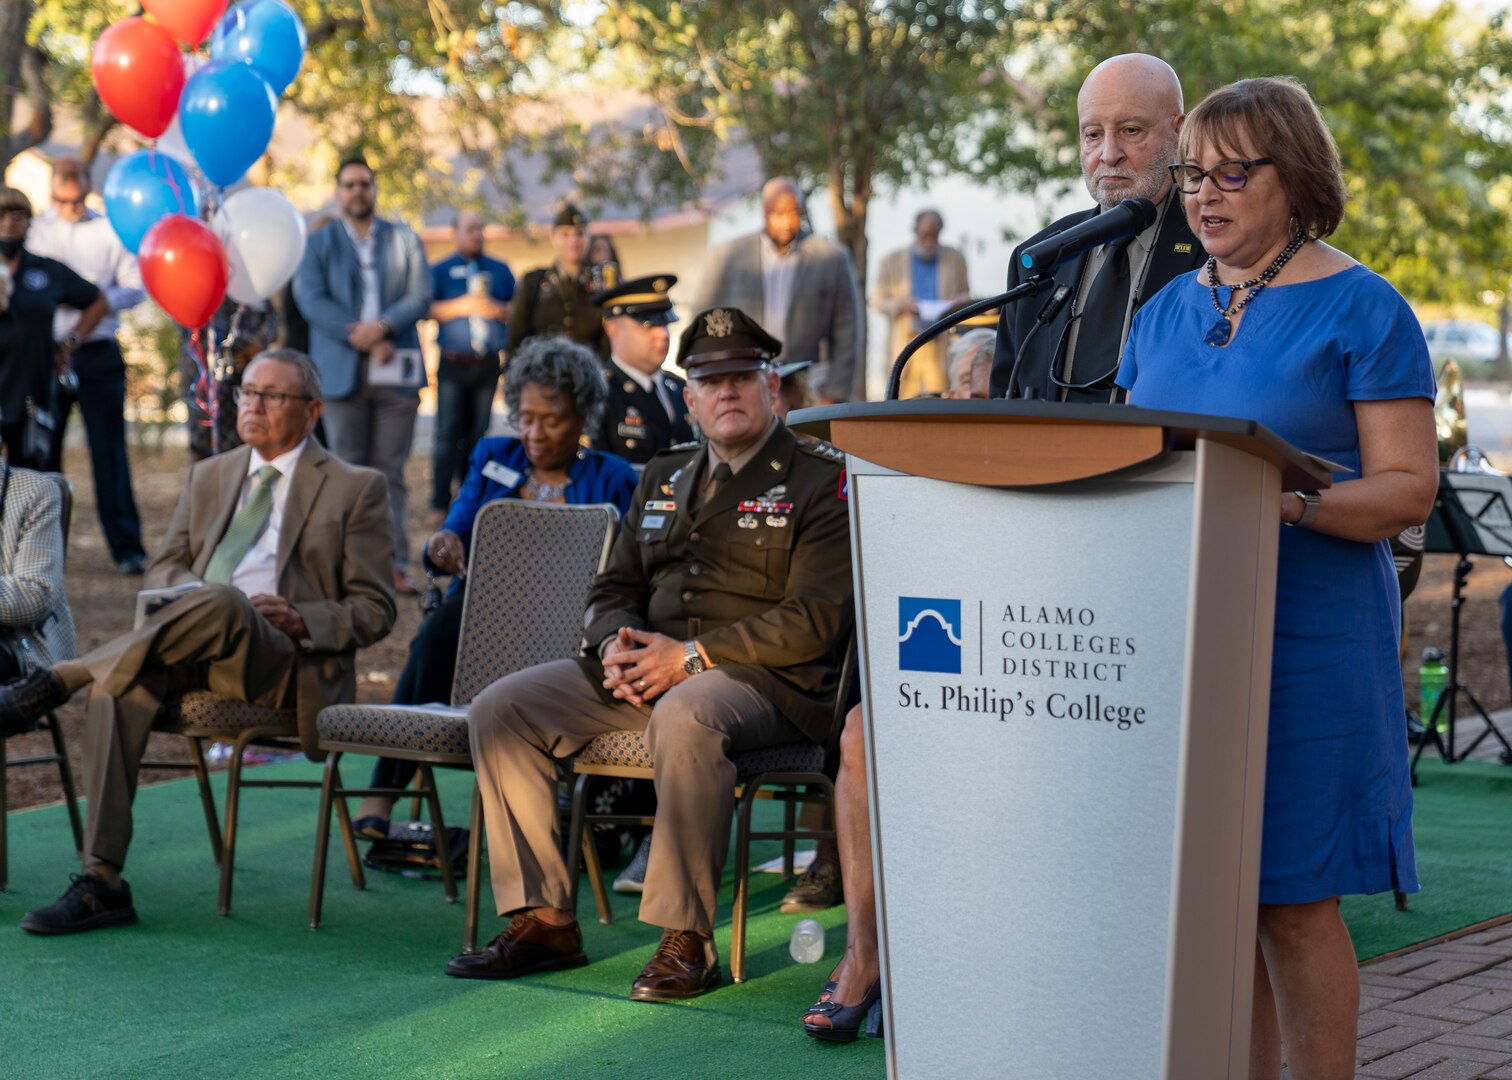 Nan Burley Richie, right, daughter of the late retired U.S. Army Col. Roy W. Burley, Sr., speaks with her brother, Roy W. Burley, Jr., left, during St. Philip’s College’s Col. Burley Oak Tree Dedication Ceremony, held on the St. Philip’s College campus, August 18, 2022. The 100-plus-year-old oak tree is part of the Burley homestead of the late retired U.S. Army Col. Roy W. Burley, Sr., for many generations. The tree now resides on the college campus with a plaque to share with future generations the legacy of “The Colonel”. (U.S. Army Photo by Bethany L. Huff)